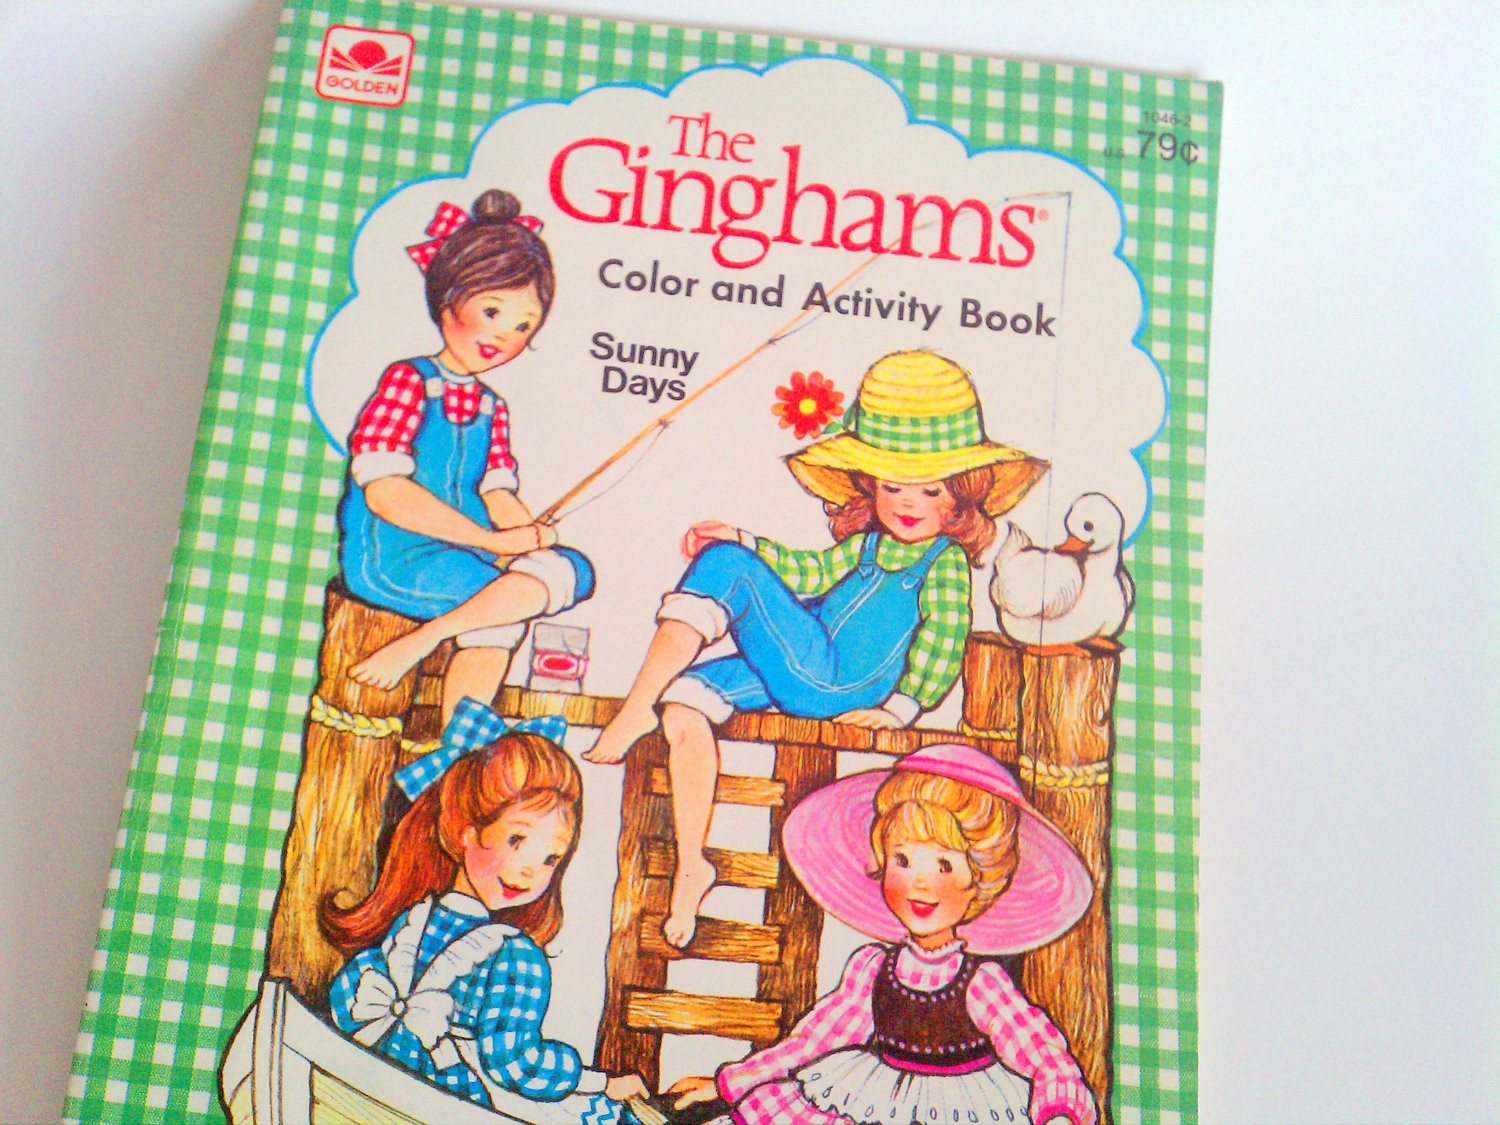 Gingham Girls Coloring Book
 Vintage Coloring Book The Ginghams Whitman Color & Activity